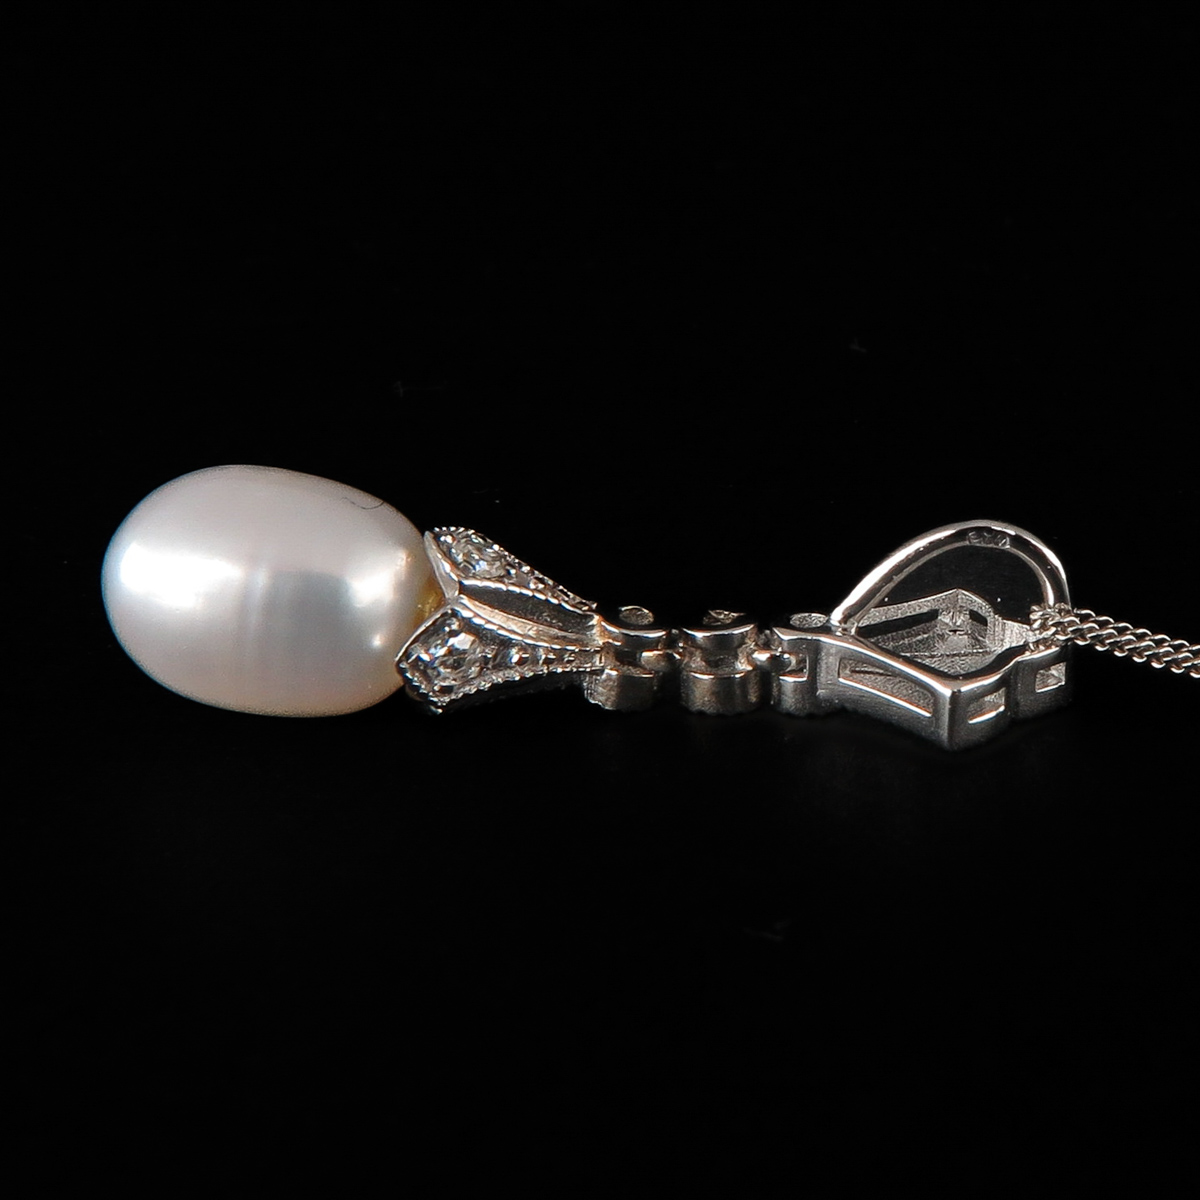 A Necklace with Pearl and Diamond Pendant - Image 6 of 6